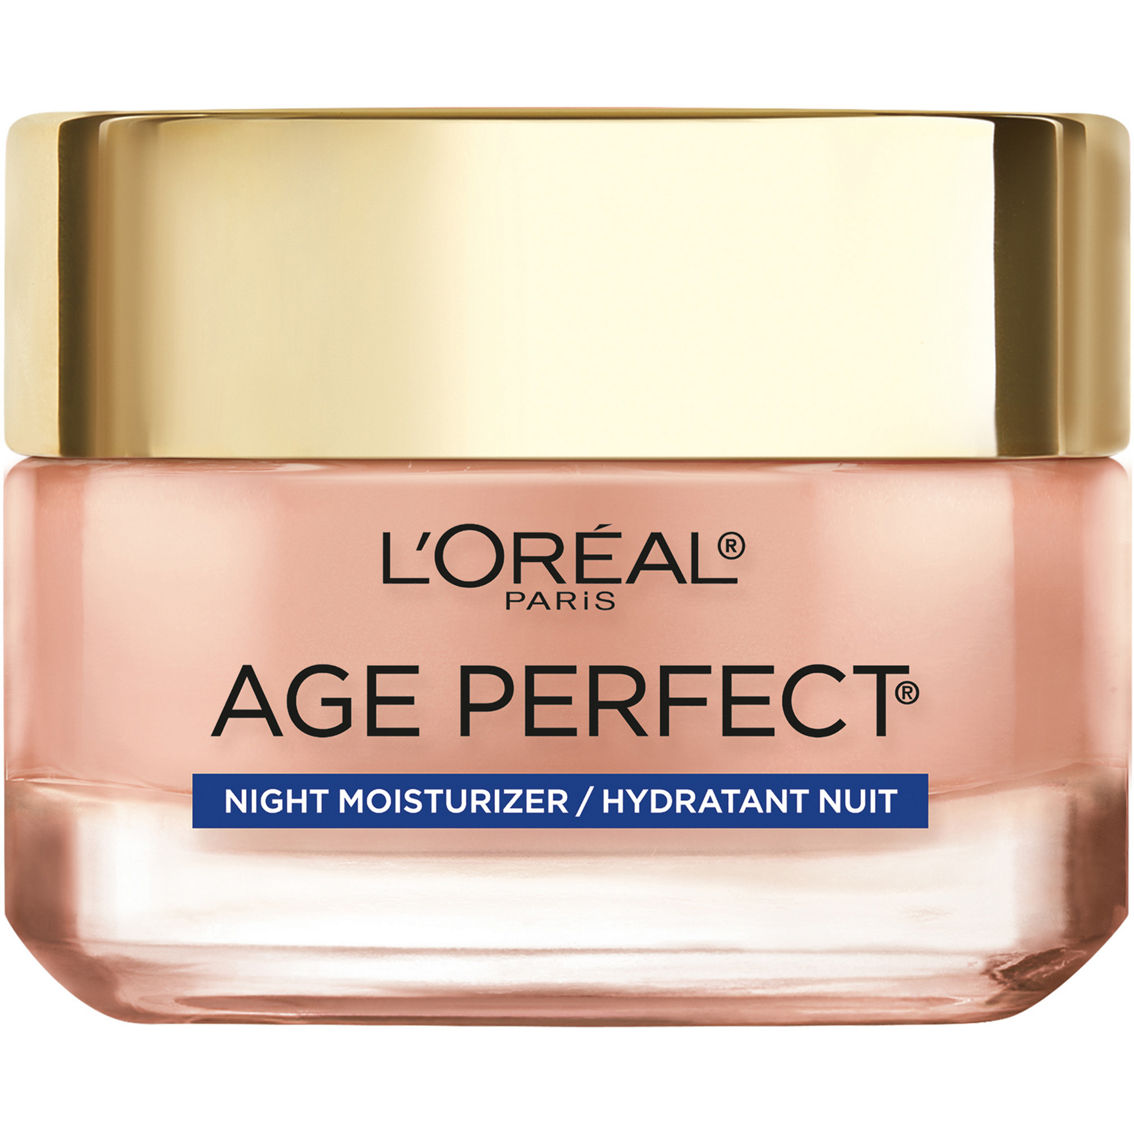 L'Oreal Age Perfect Rosy Tone Cooling Night Moisturizer - Image 2 of 3